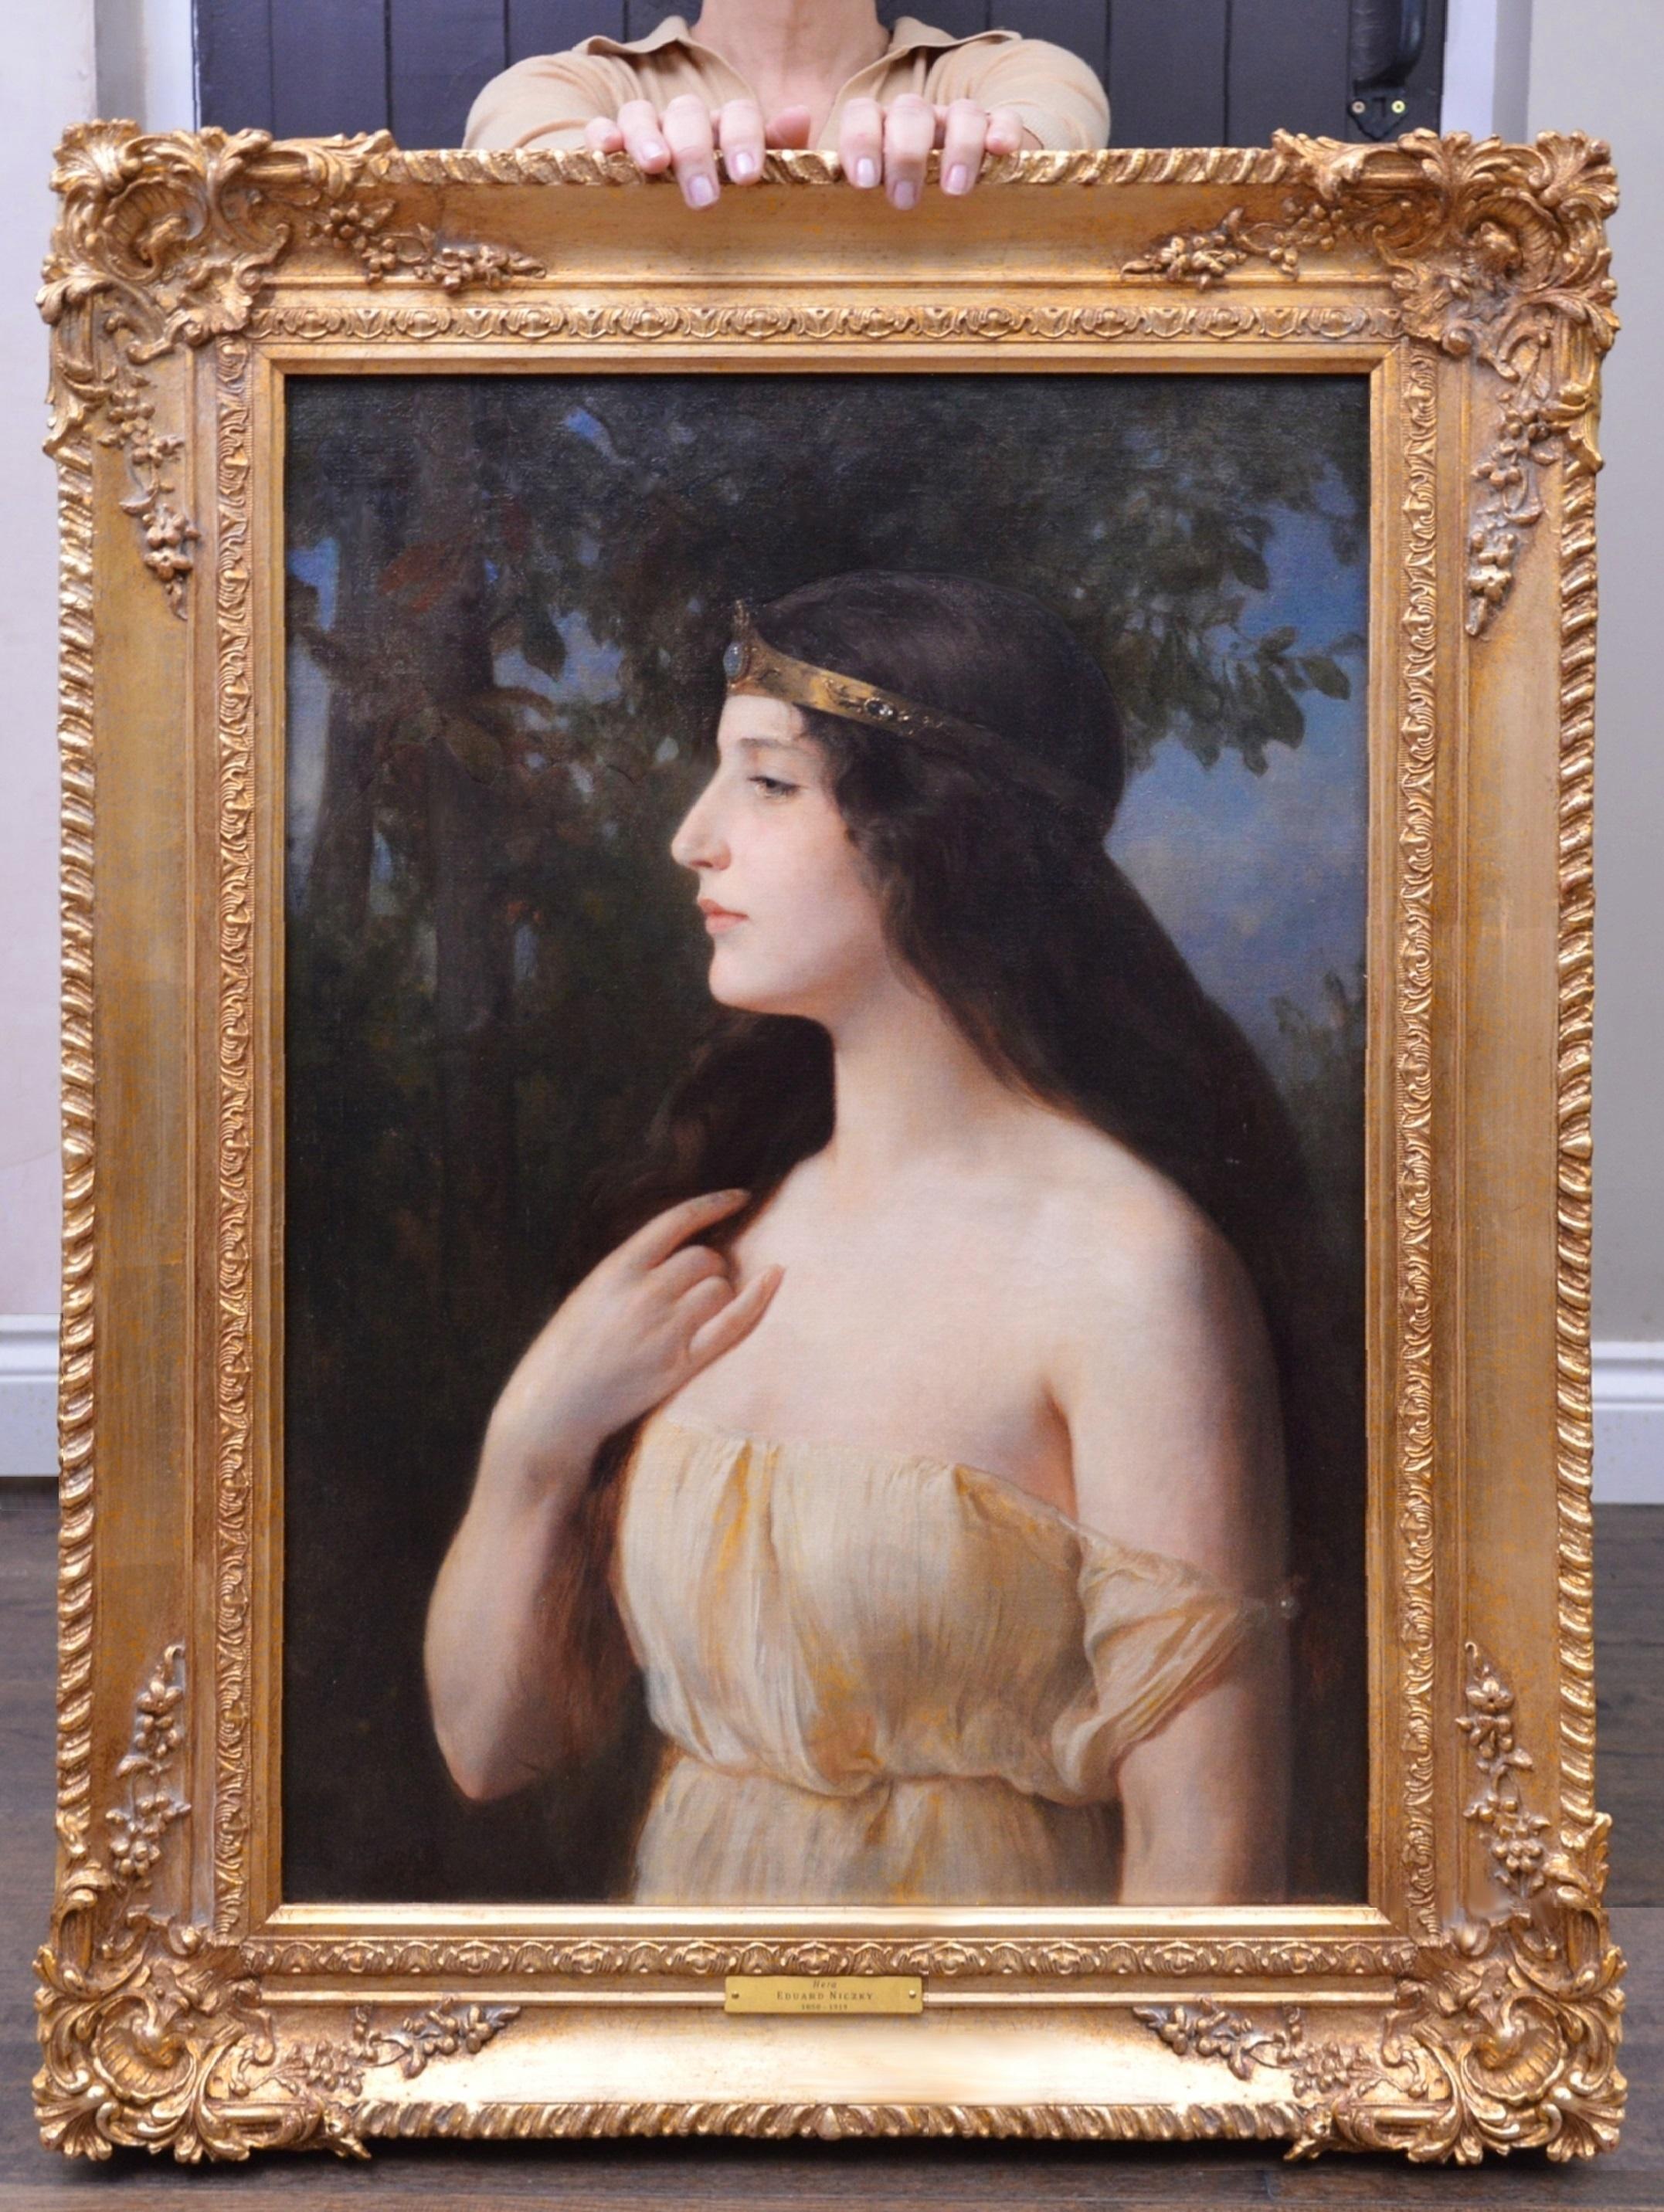 Eduard Niczky Portrait Painting - The Goddess Hera - 19th Century Neoclassical Oil Painting Ancient Greek Myth